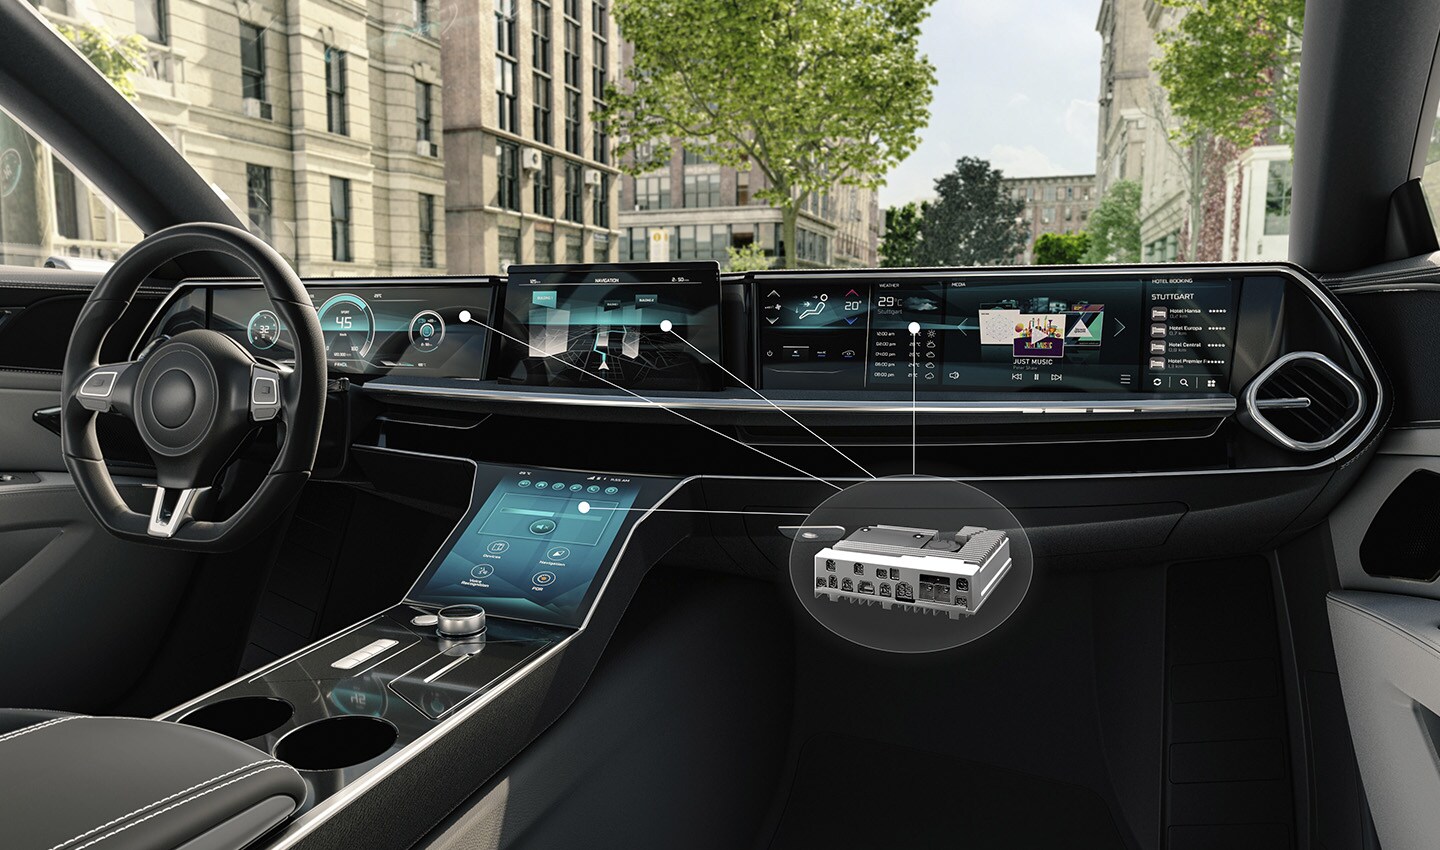 Bosch’s infotainment domain computer is the hardware brains behind what brings a digital cockpit experience to life.